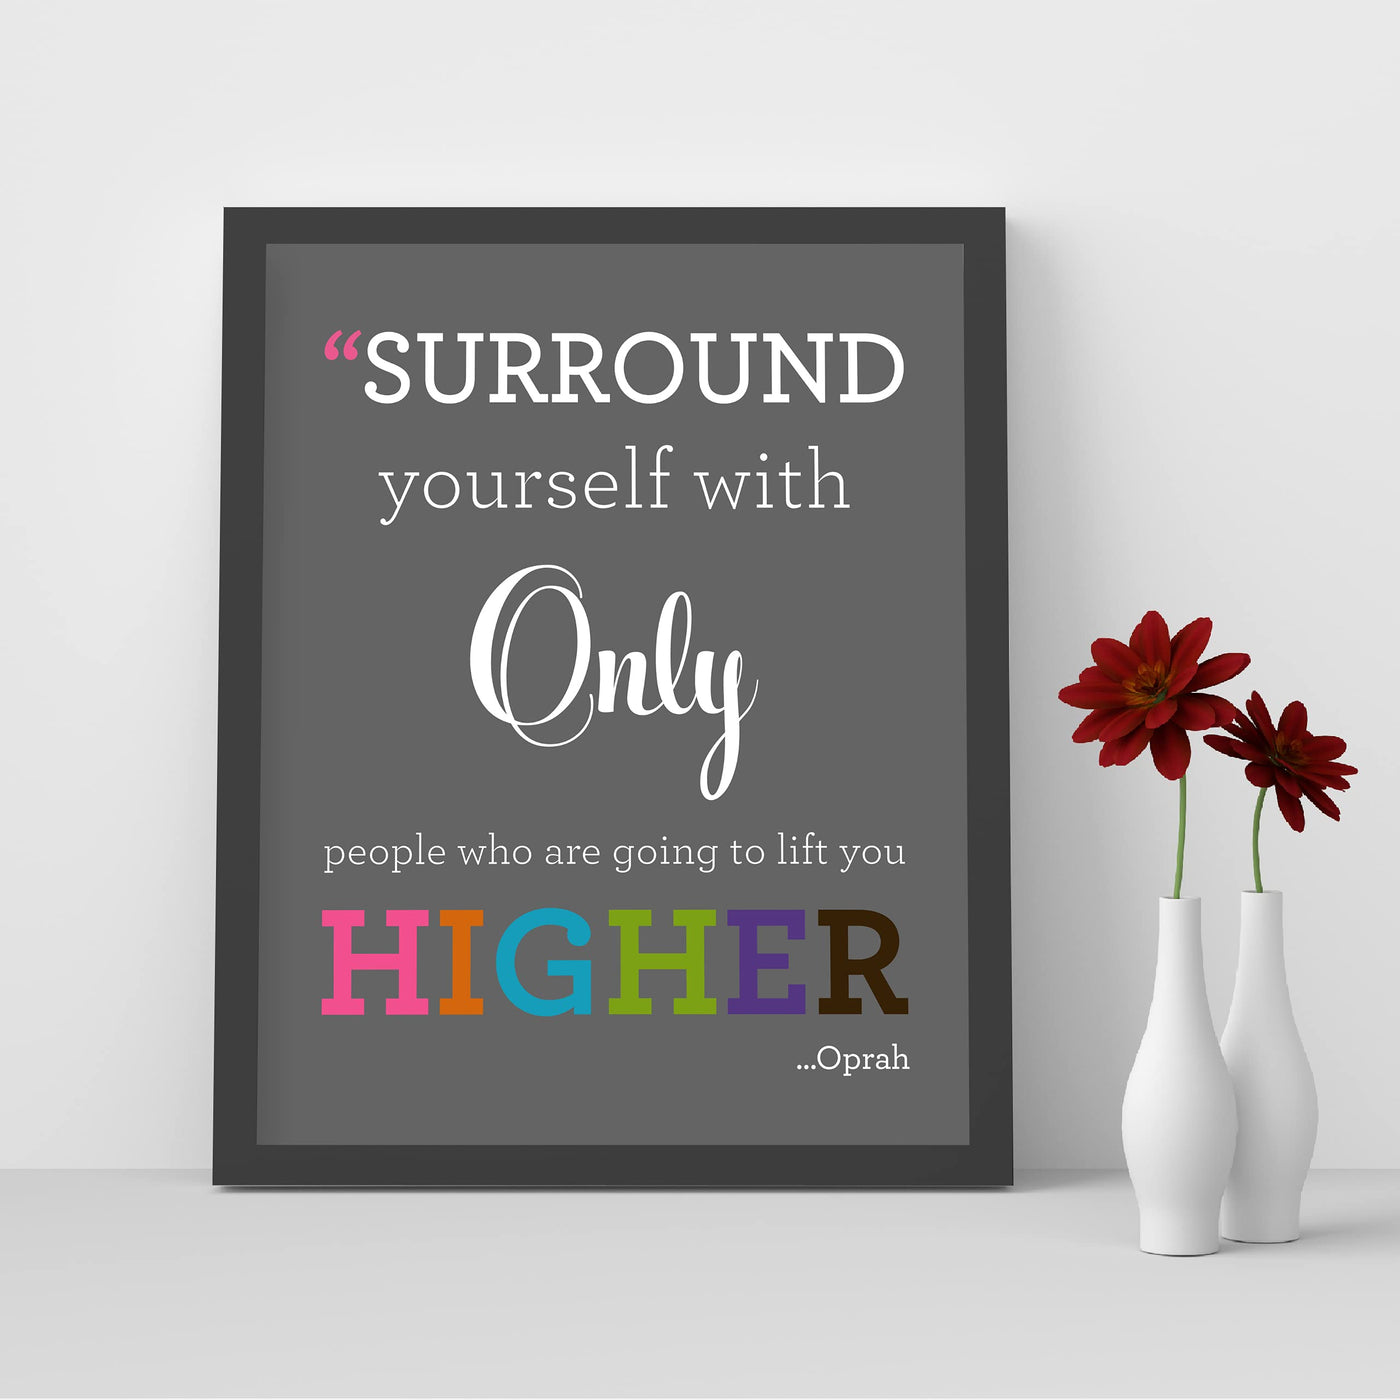 Oprah Winfrey Quotes-"Surround Yourself With People Who Lift You Higher" Inspirational Wall Art -8 x 10" Modern Typography Print-Ready to Frame. Home-Office-School Decor. Great Gift of Motivation!